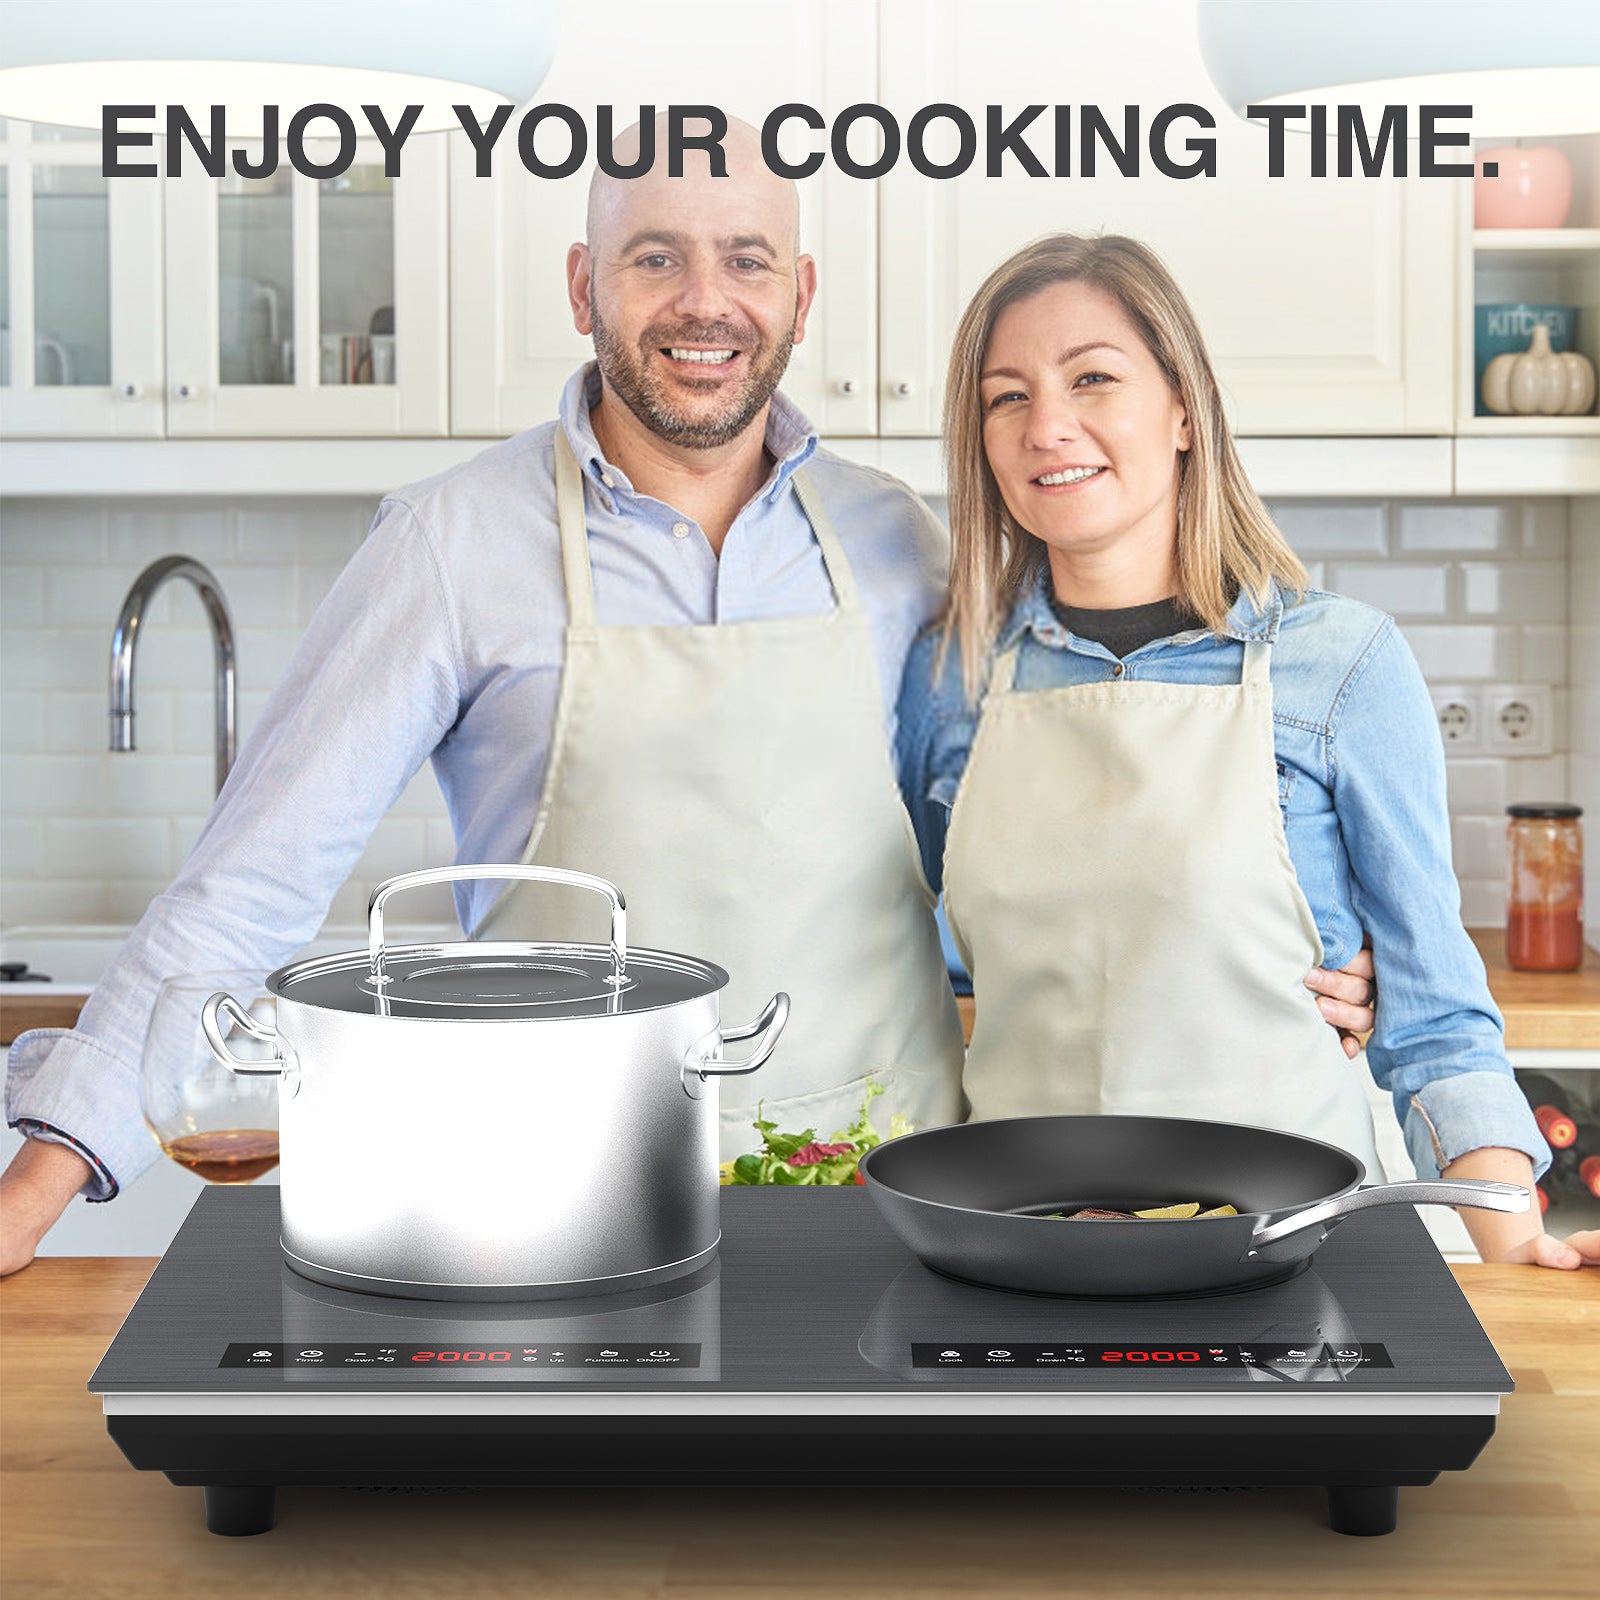 GTKZW Induction Cooktop 2 Burner Electric Cooktop Touch Control